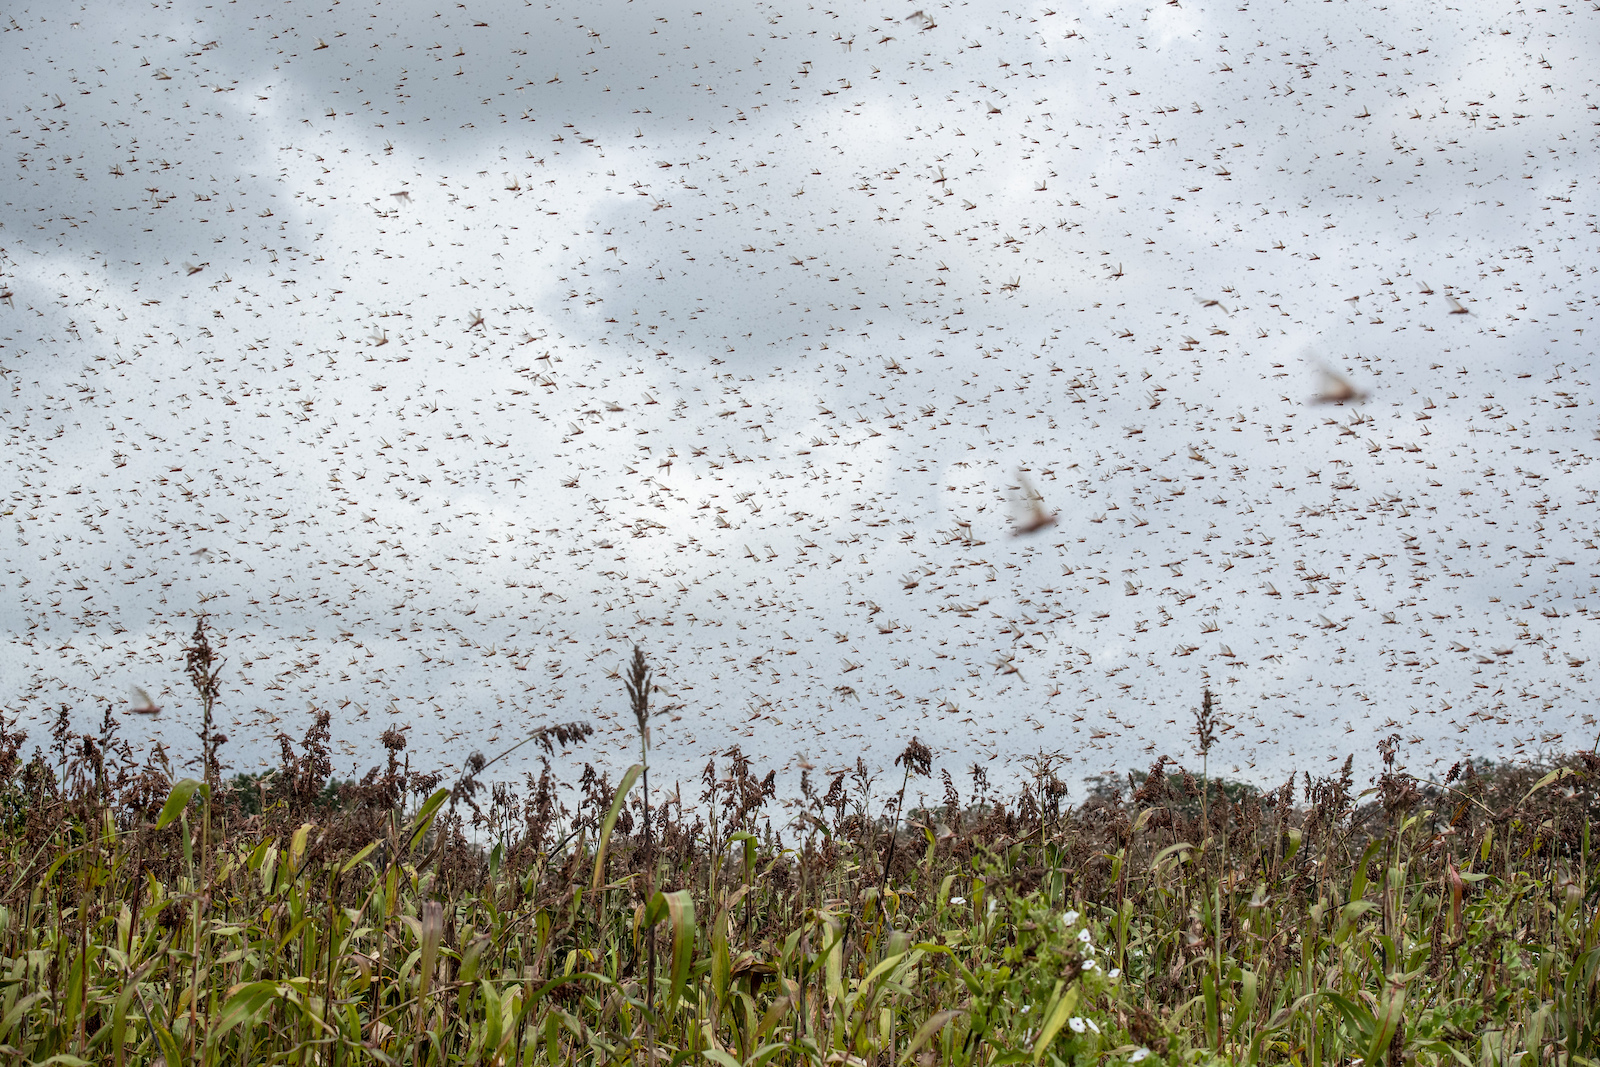 a swarm of flying bugs over crops